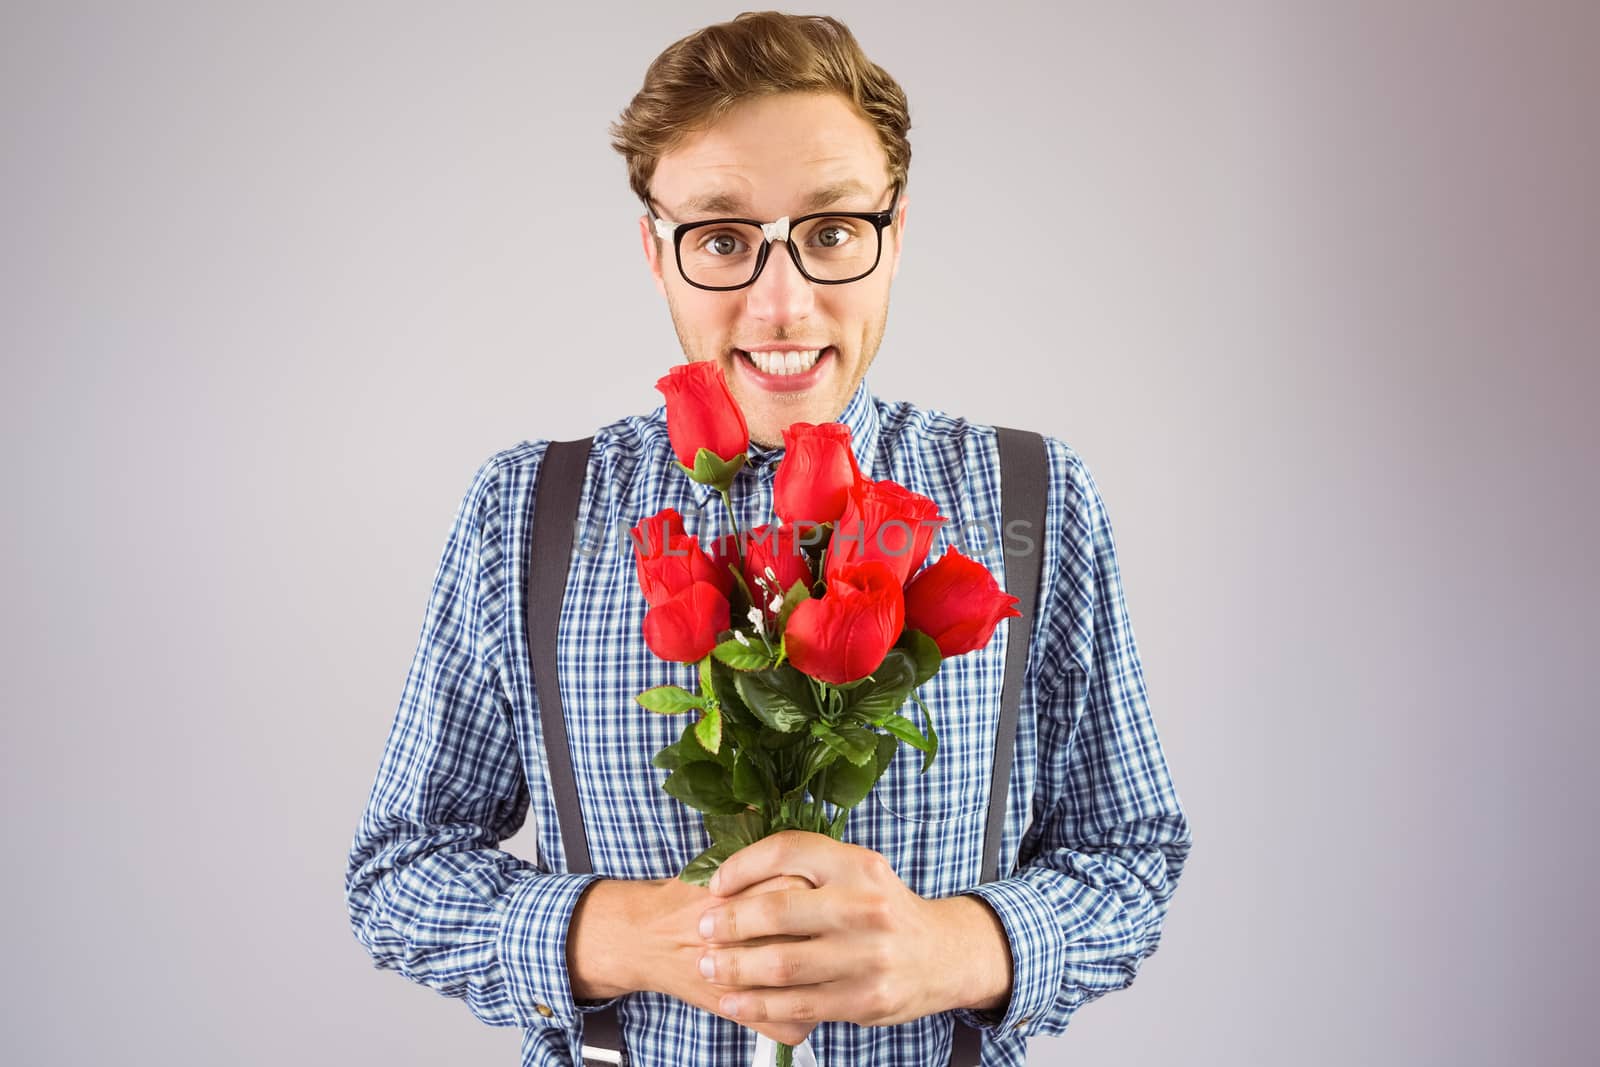 Geeky hipster holding a bunch of roses by Wavebreakmedia